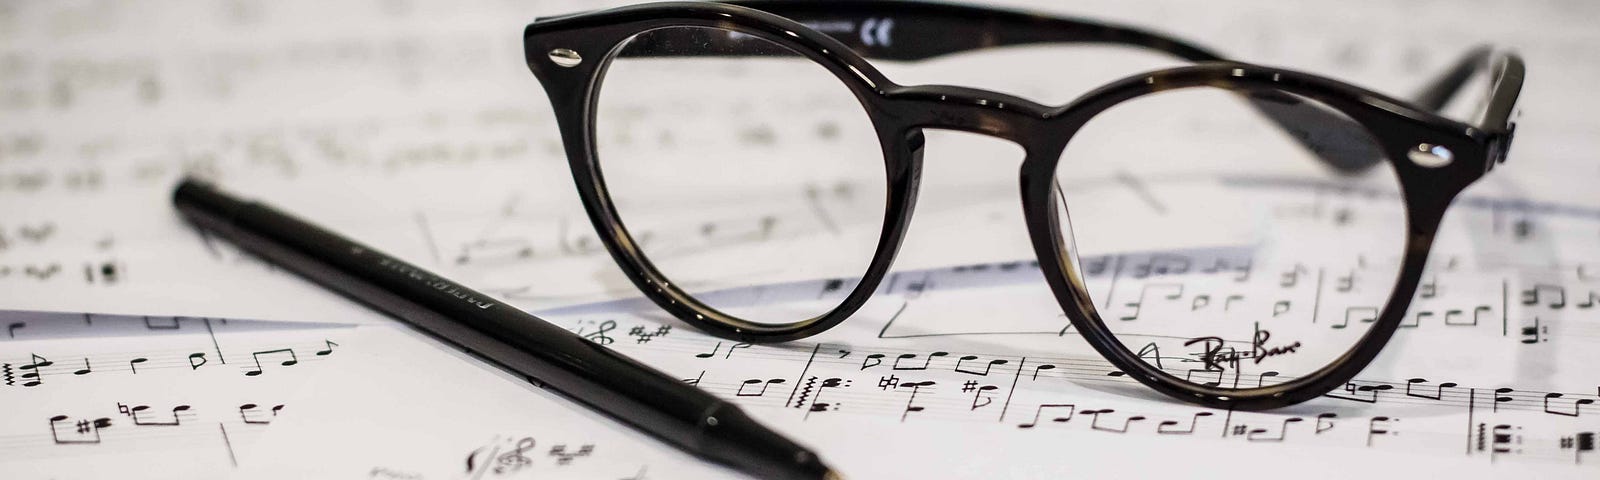 Stock photo of eyeglasses and a pen on top of sheet music, by Dayne Topkin on Unsplash